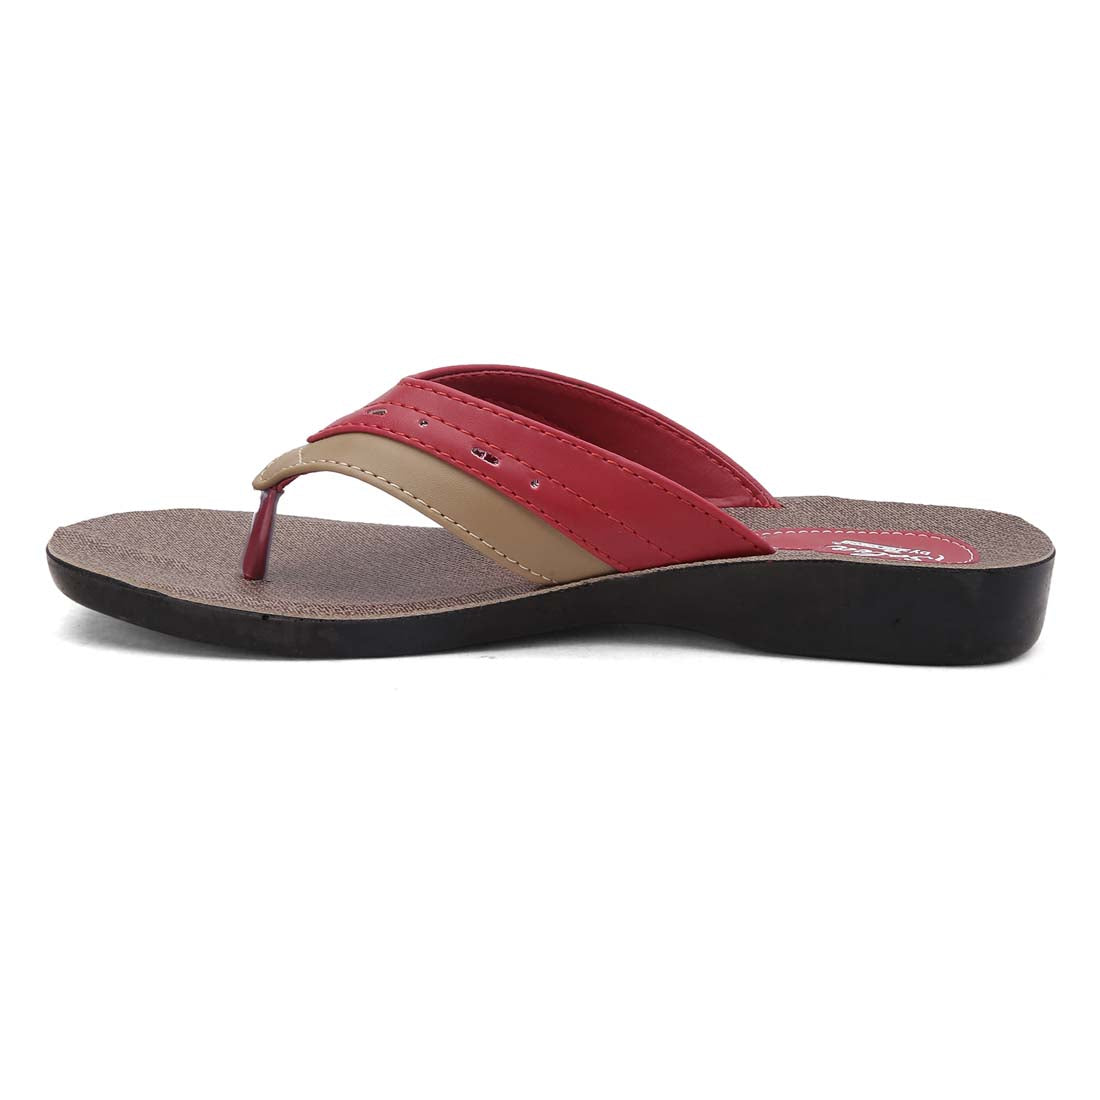 Paragon PU7991L Women Stylish Lightweight Flipflops | Comfortable with Anti skid soles | Casual &amp; Trendy Slippers | Indoor &amp; Outdoor